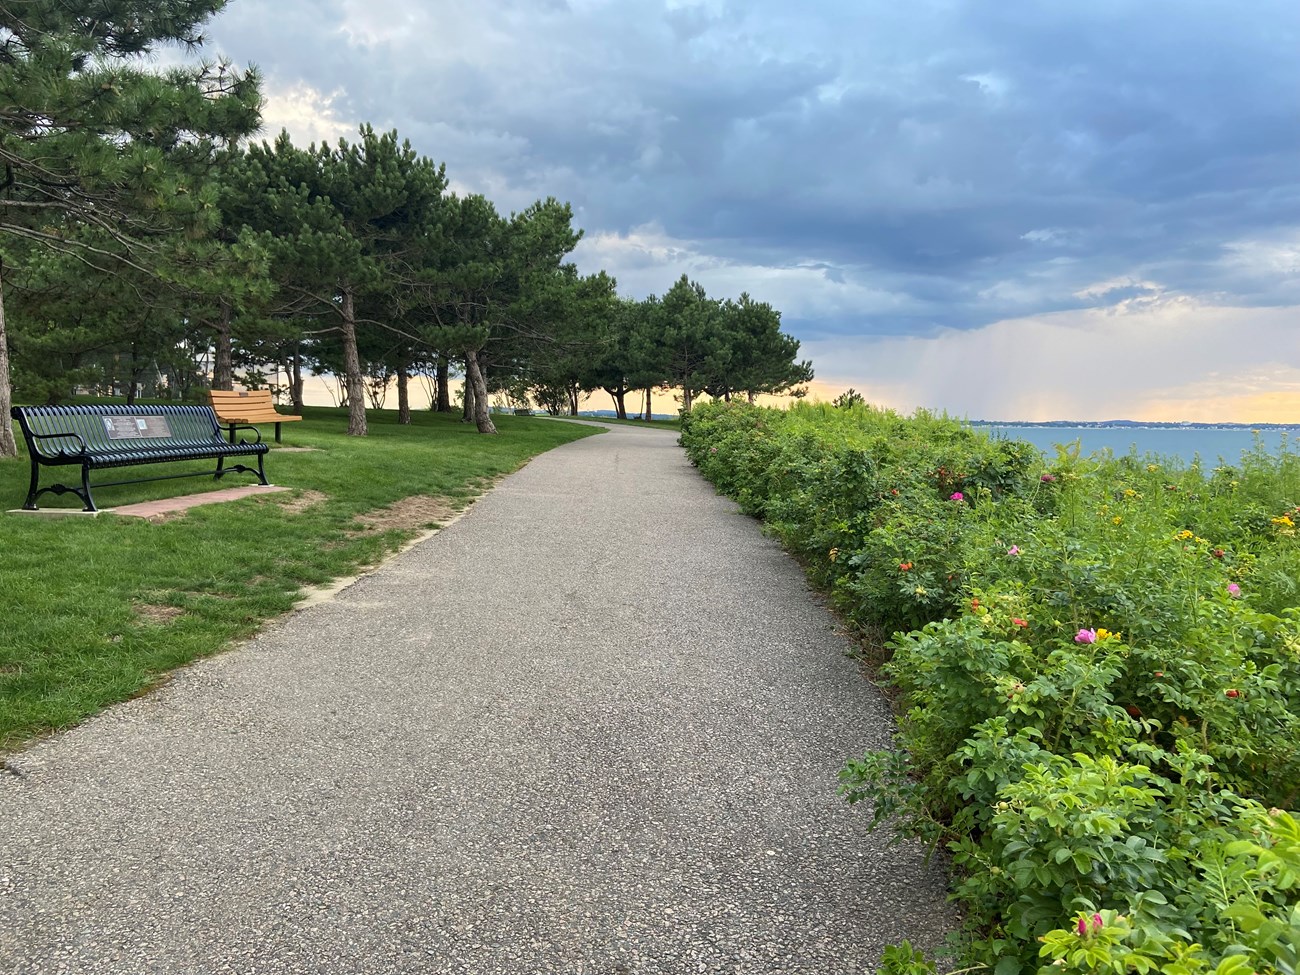 A paved path with benches on the left and flowering bushes to the right.